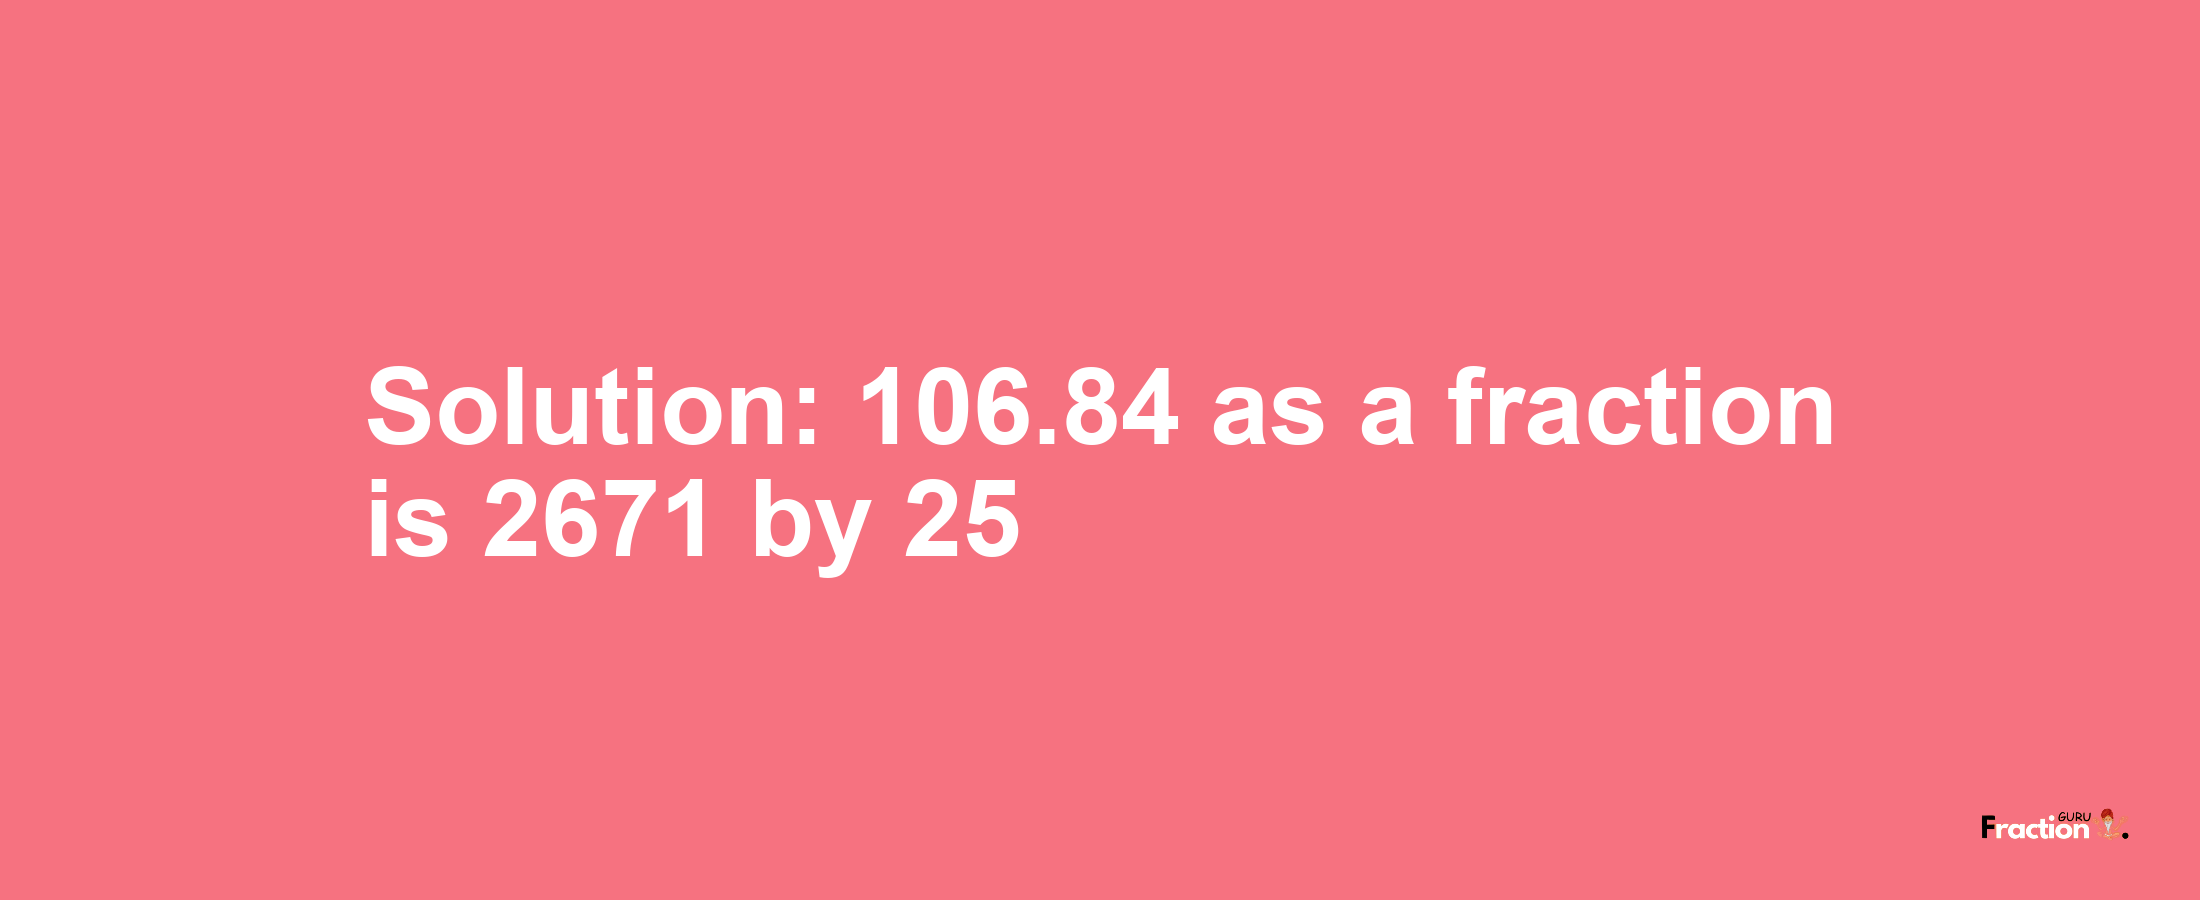 Solution:106.84 as a fraction is 2671/25